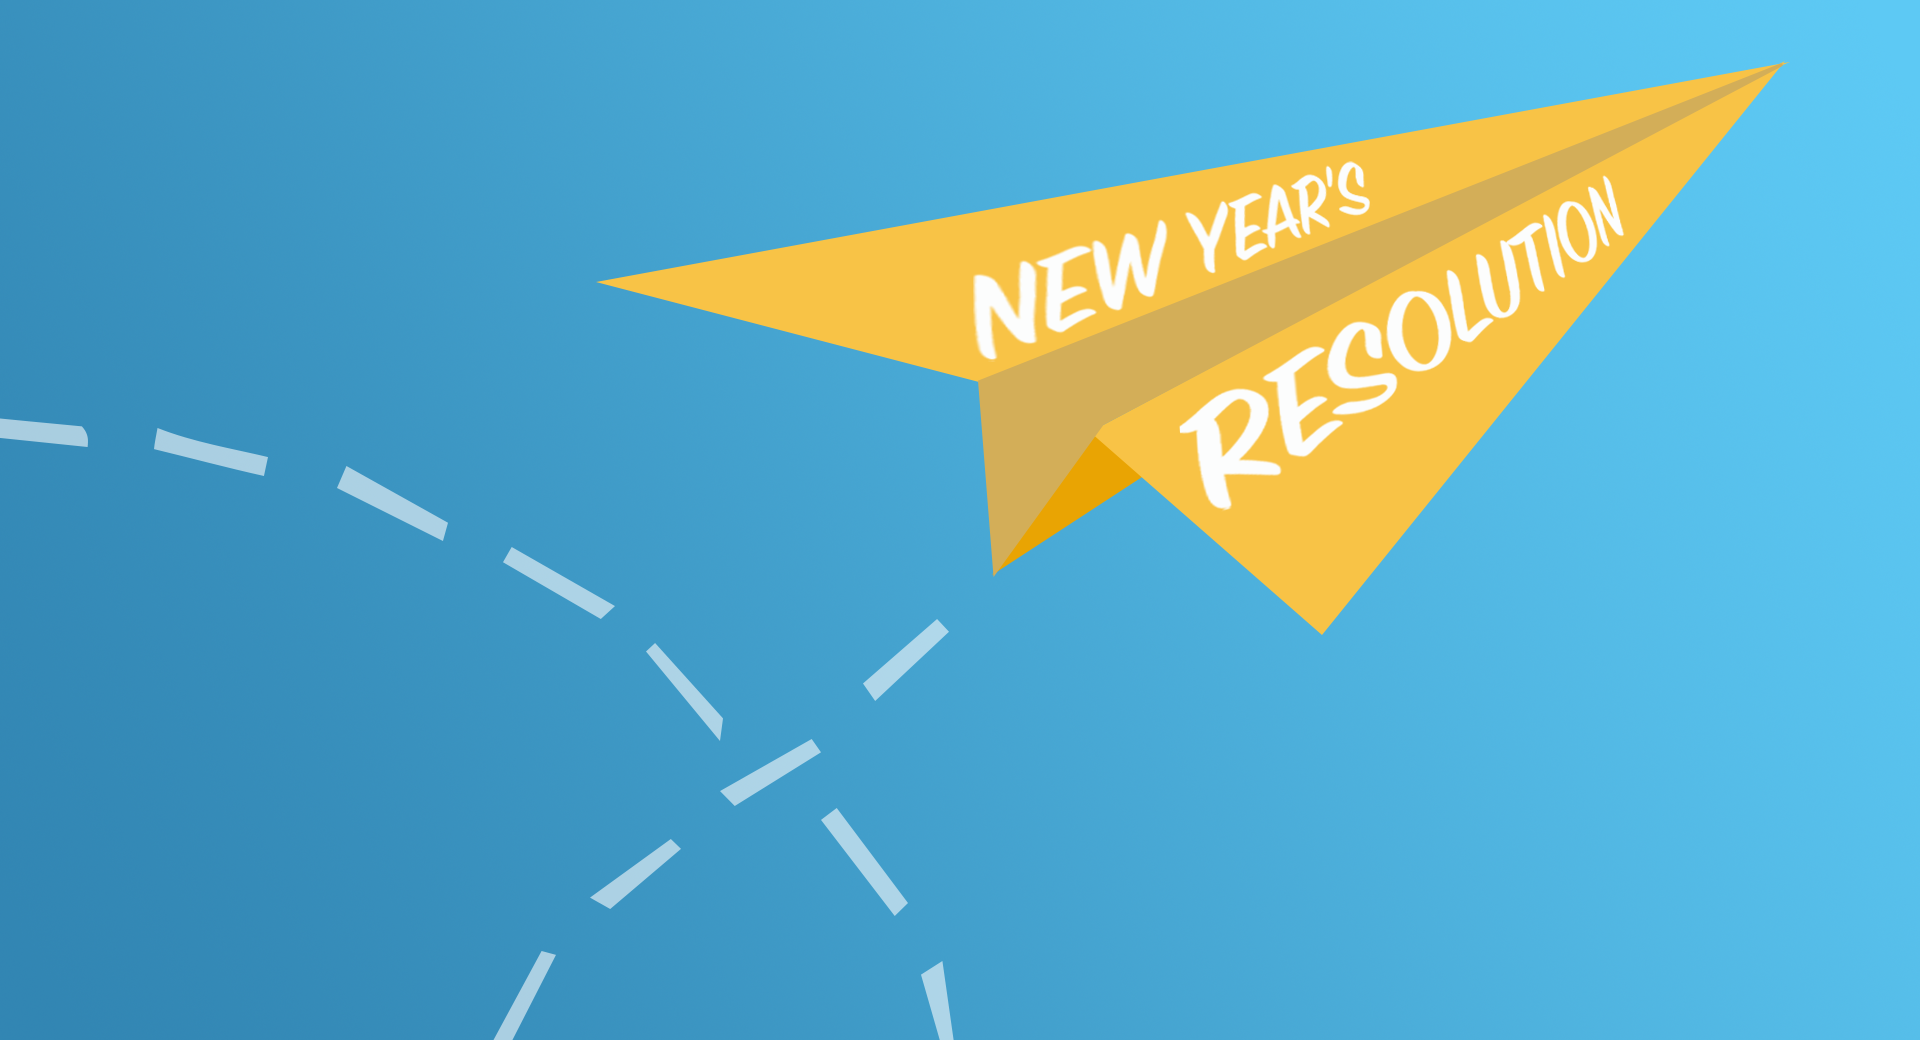 Less Paper, Not Paperless: A New Year’s Resolution